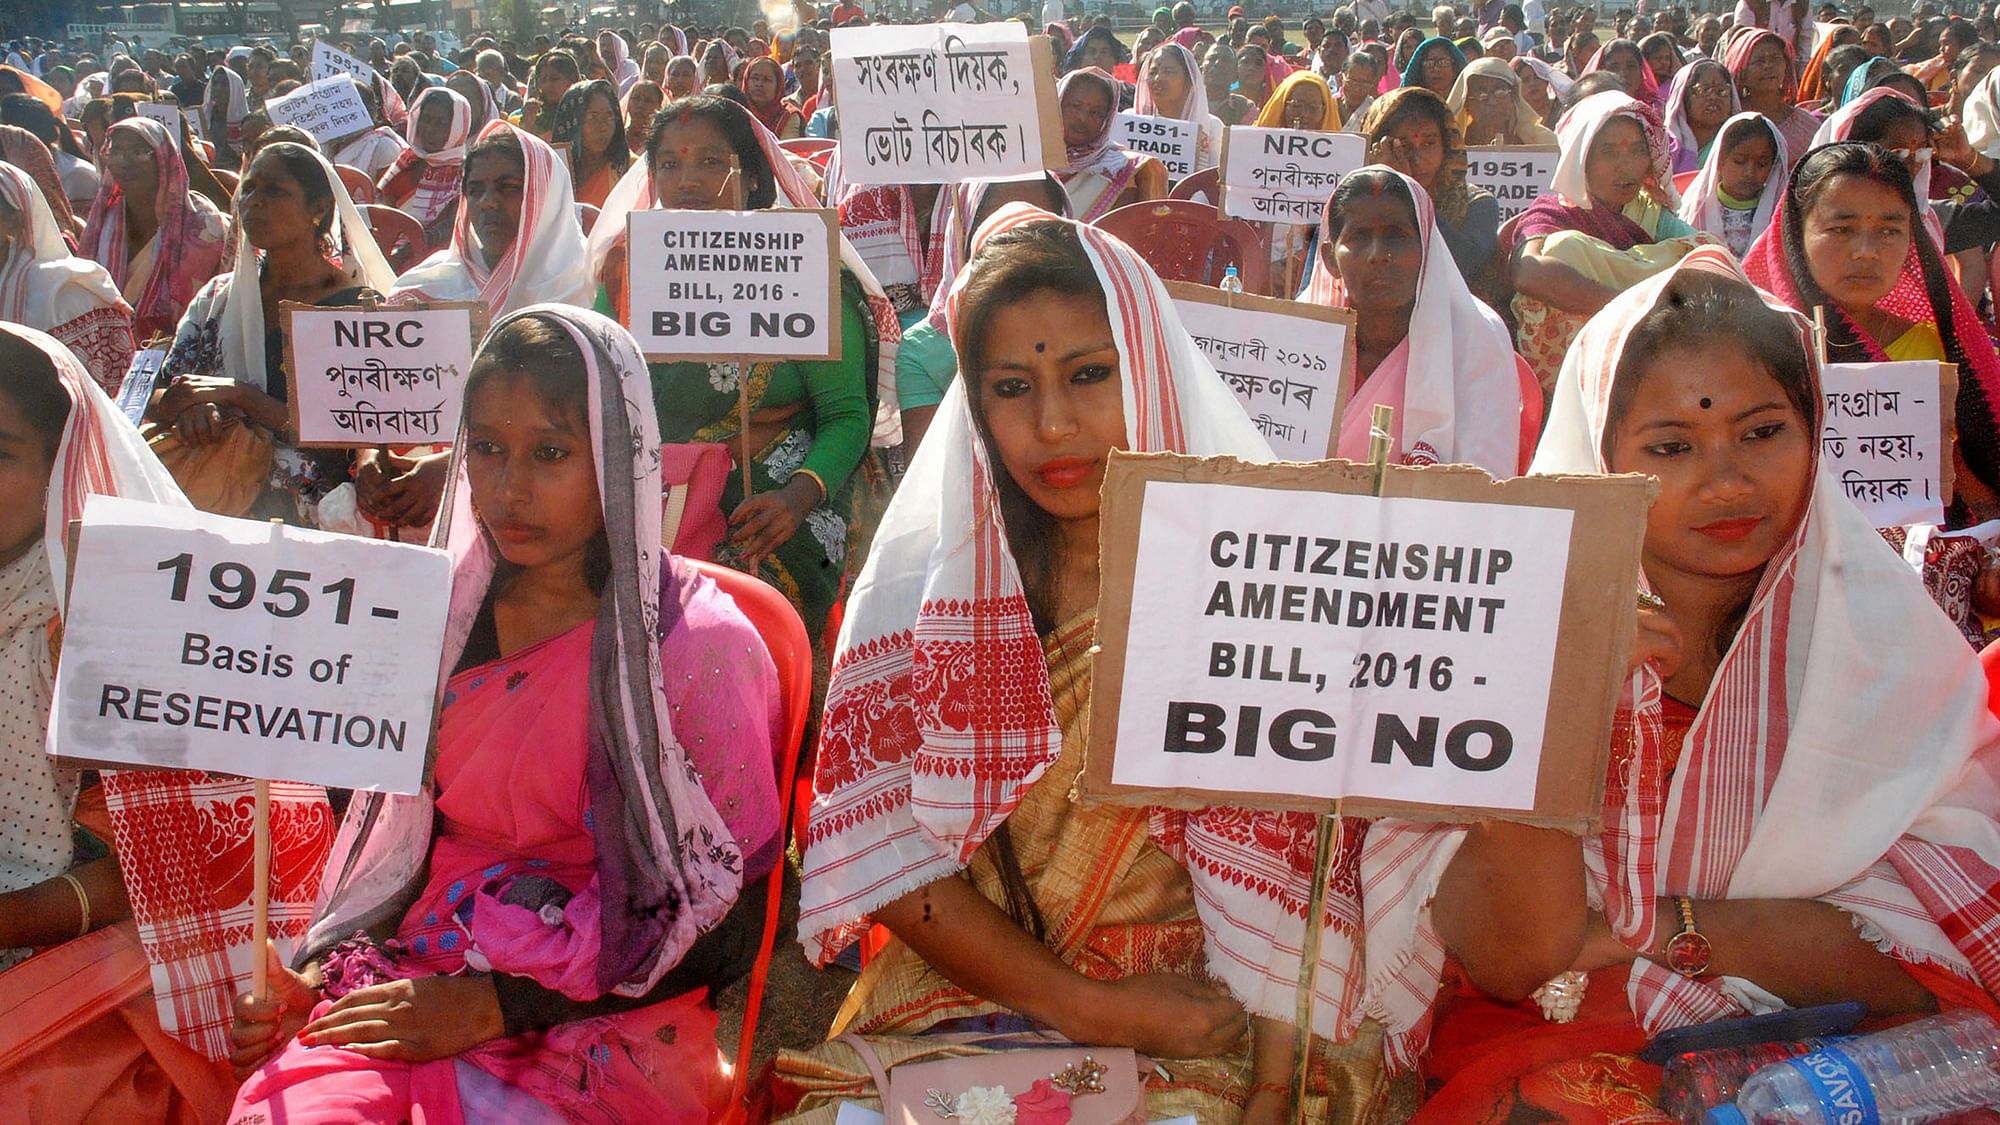 Members of Prabajan Birodhi Manch participate in a protest rally for re-verification of NRC and various other demands, in Guwahati, Saturday, Dec. 8, 2018.